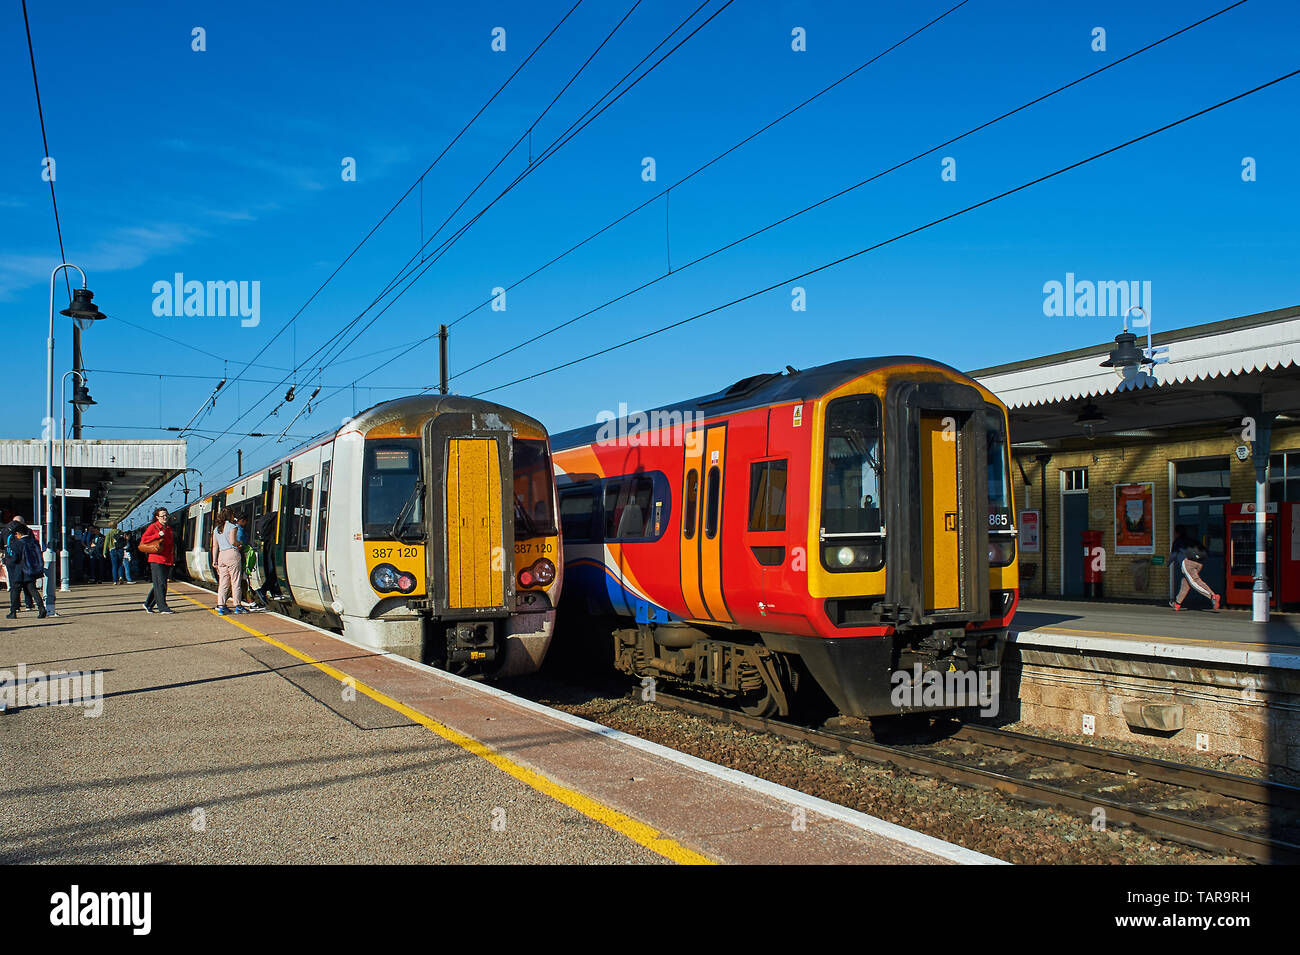 Morning commuter passenger trains passing at Ely station Stock Photo